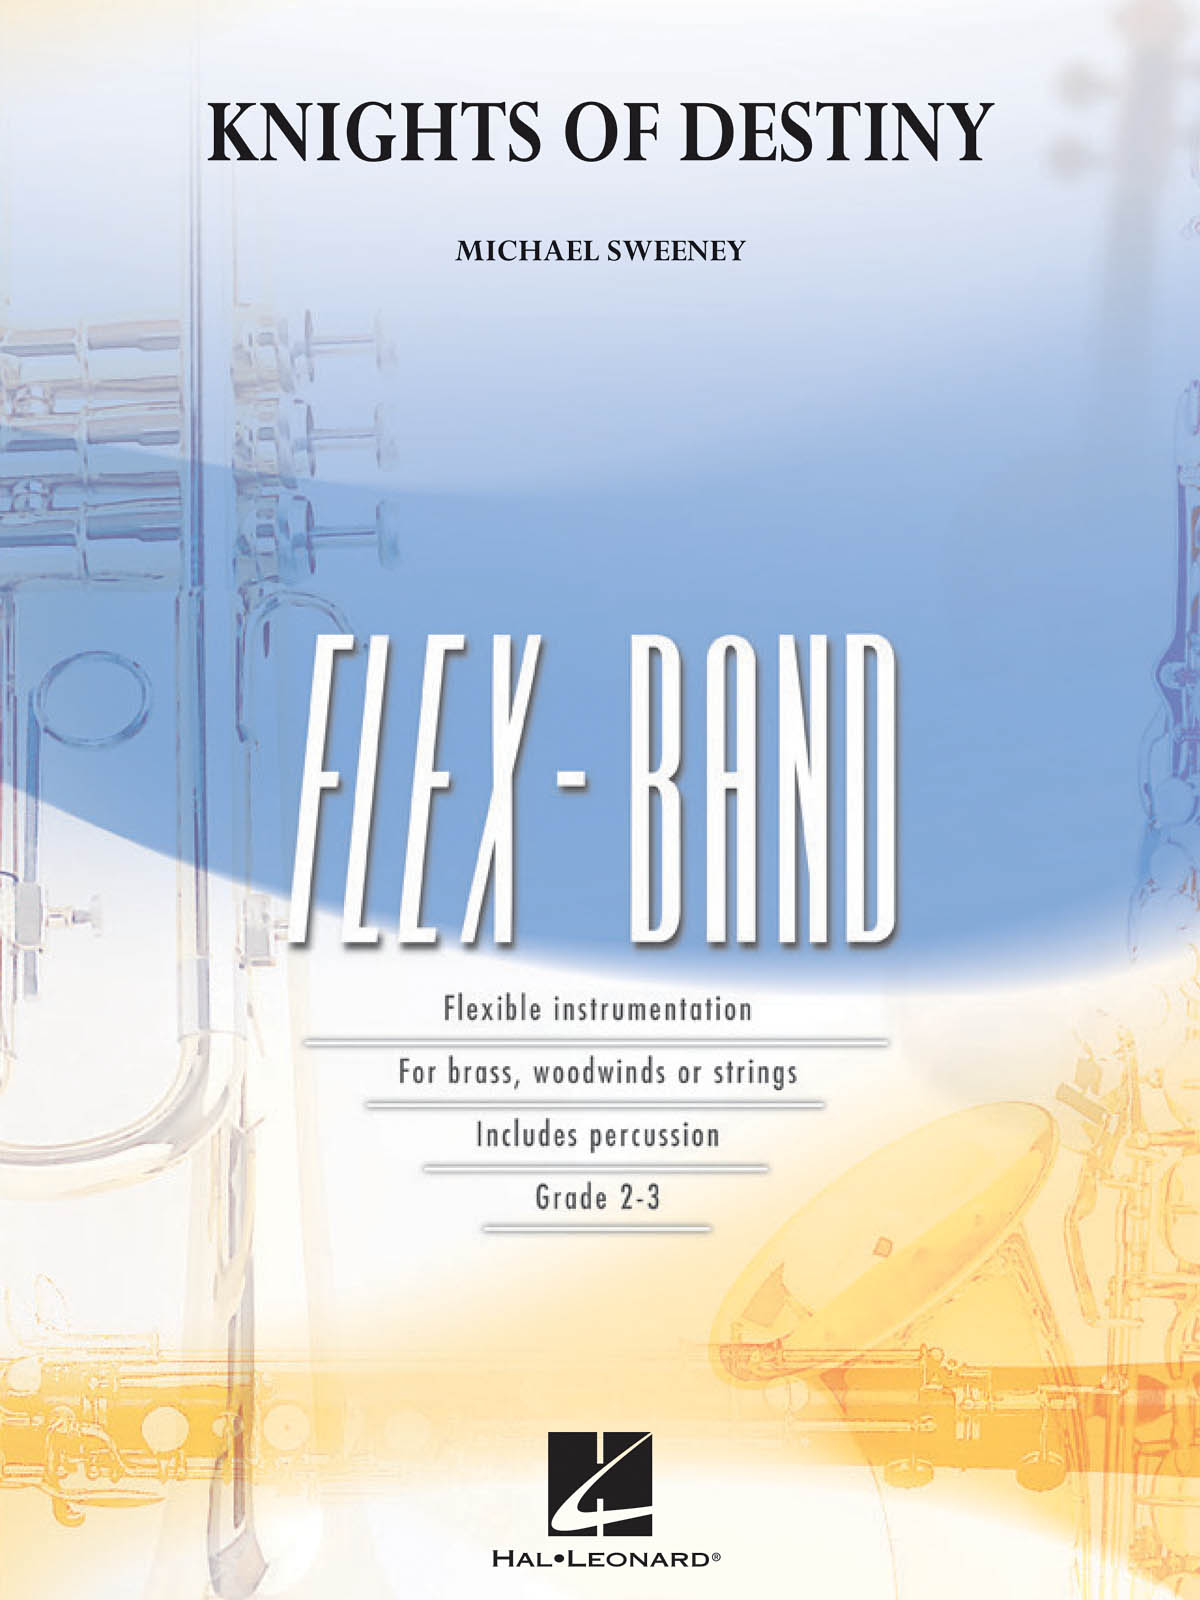 Knights of Destiny (flexband) - Flexible Instrumentation for brass, woodwind or strings. Includes Percussion - pro orchestr